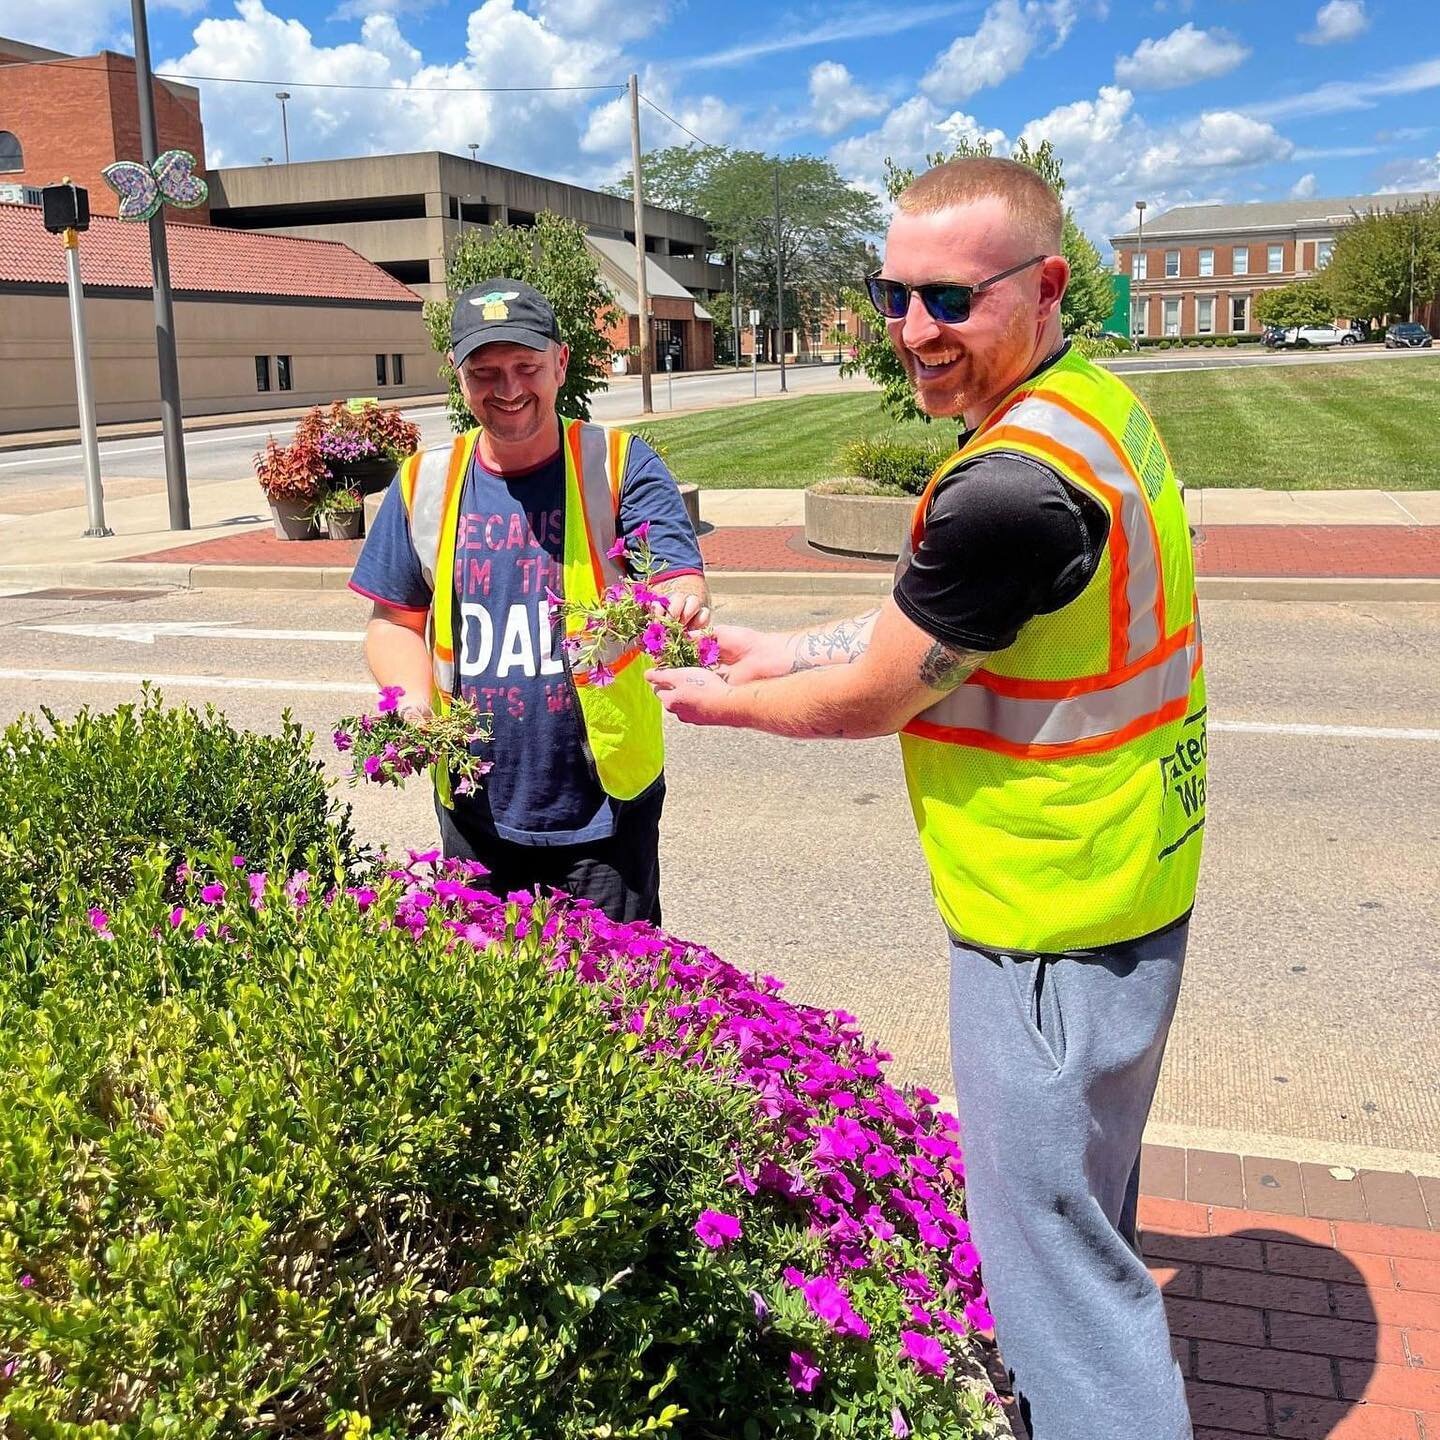 Have you spotted our Downtown Ambassadors out this summer?

They have been working hard to keep the downtown area clean and make sure the flowerpots look great! 

#LiveUnited #UnitedInTheGame #DowntownAmbassadors #Volunteer